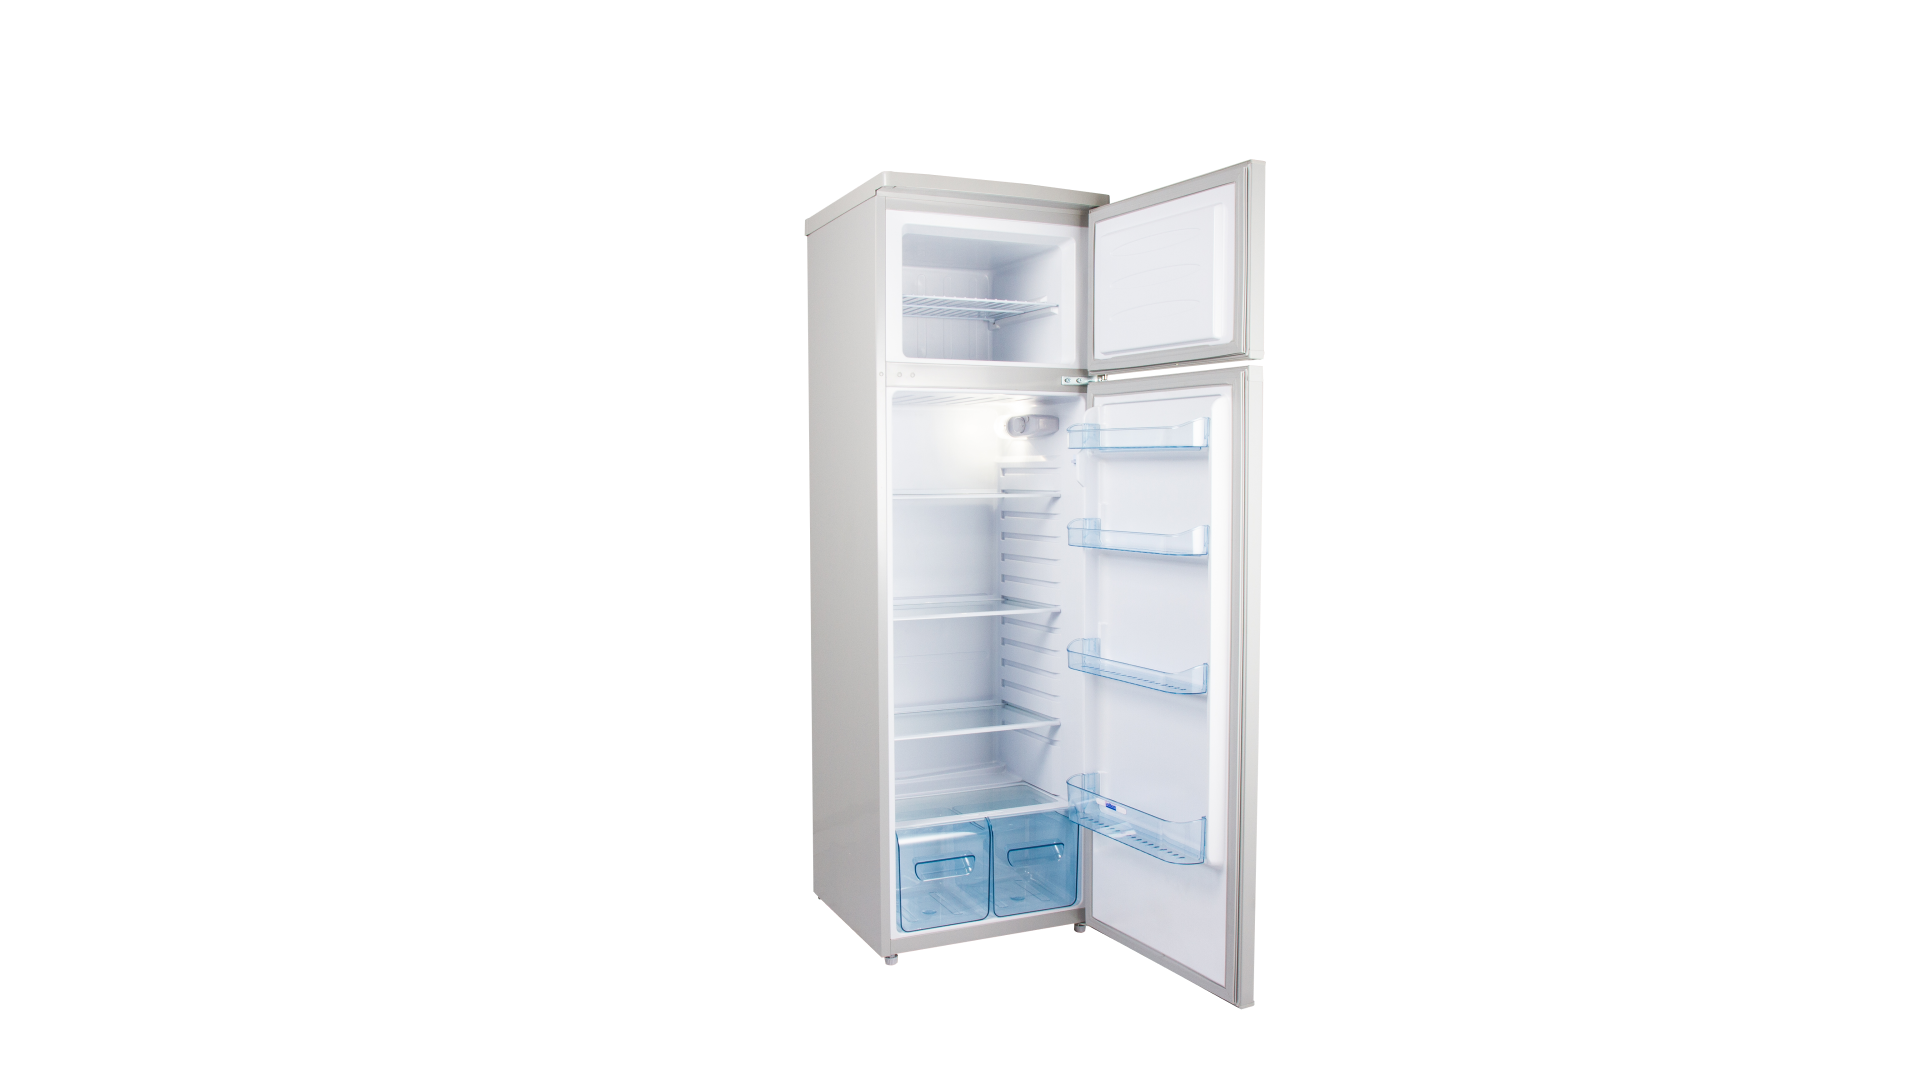 Product picture of Cruise Silver 280 fridge with open door